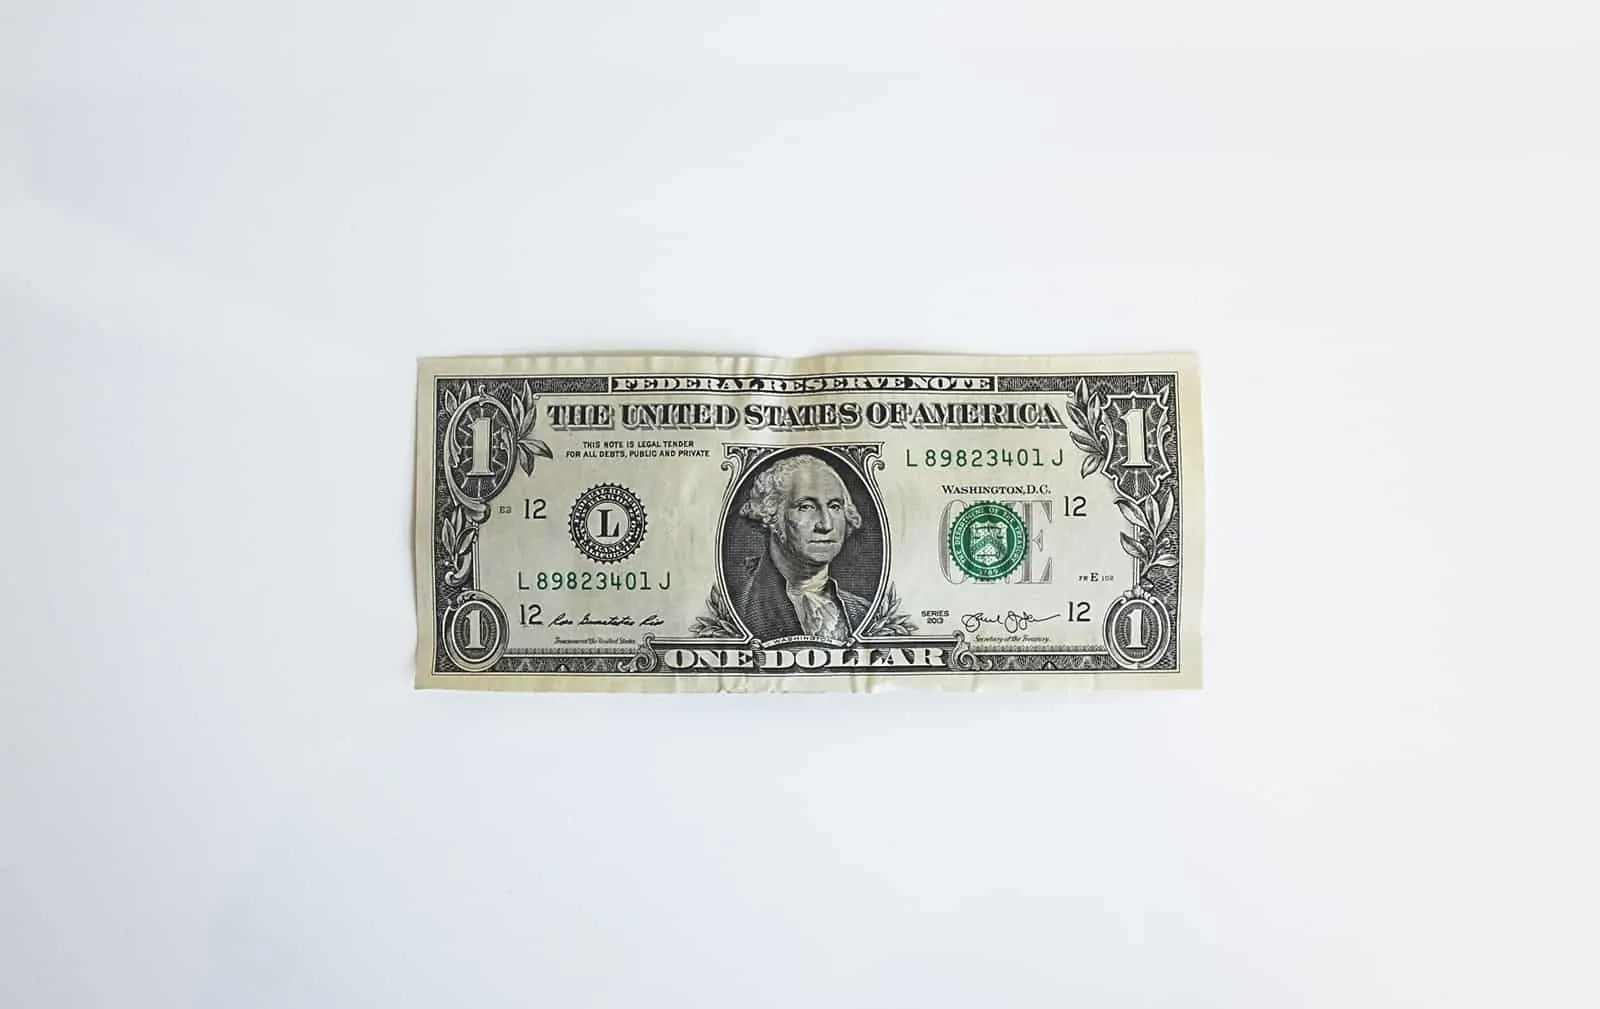 An image of a single dollar on a white background